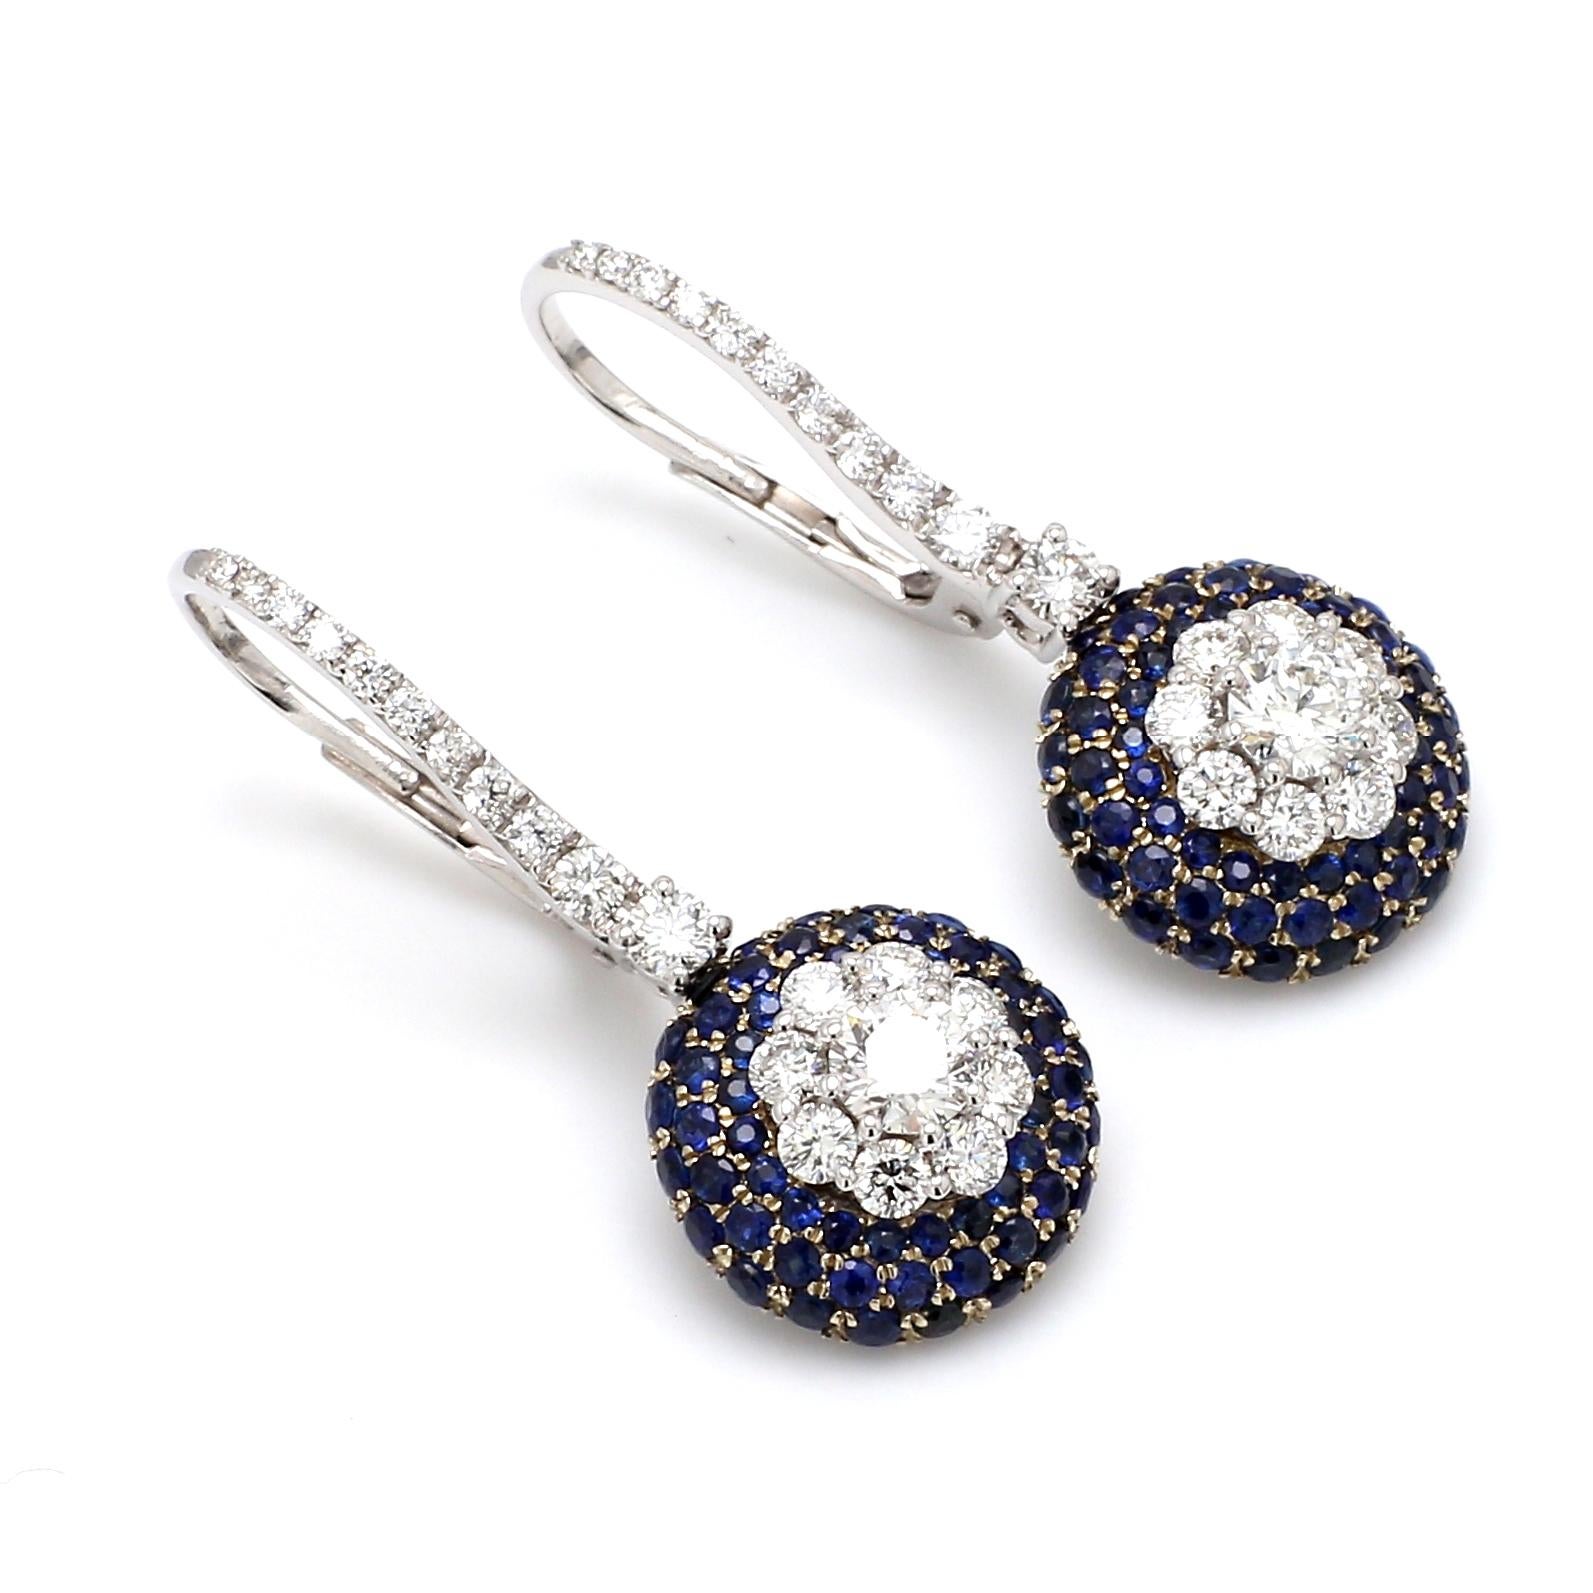 A Beautiful Handcrafted  Earring in 18 karat White Gold with Natural Brilliant Cut Colorless GIA Certified Round Diamond And AAA Cut Round Blue Sapphire Gemstones. A Statement piece for Evening Wear totaling 1.82 ct of Diamonds & 2.16 Carat of